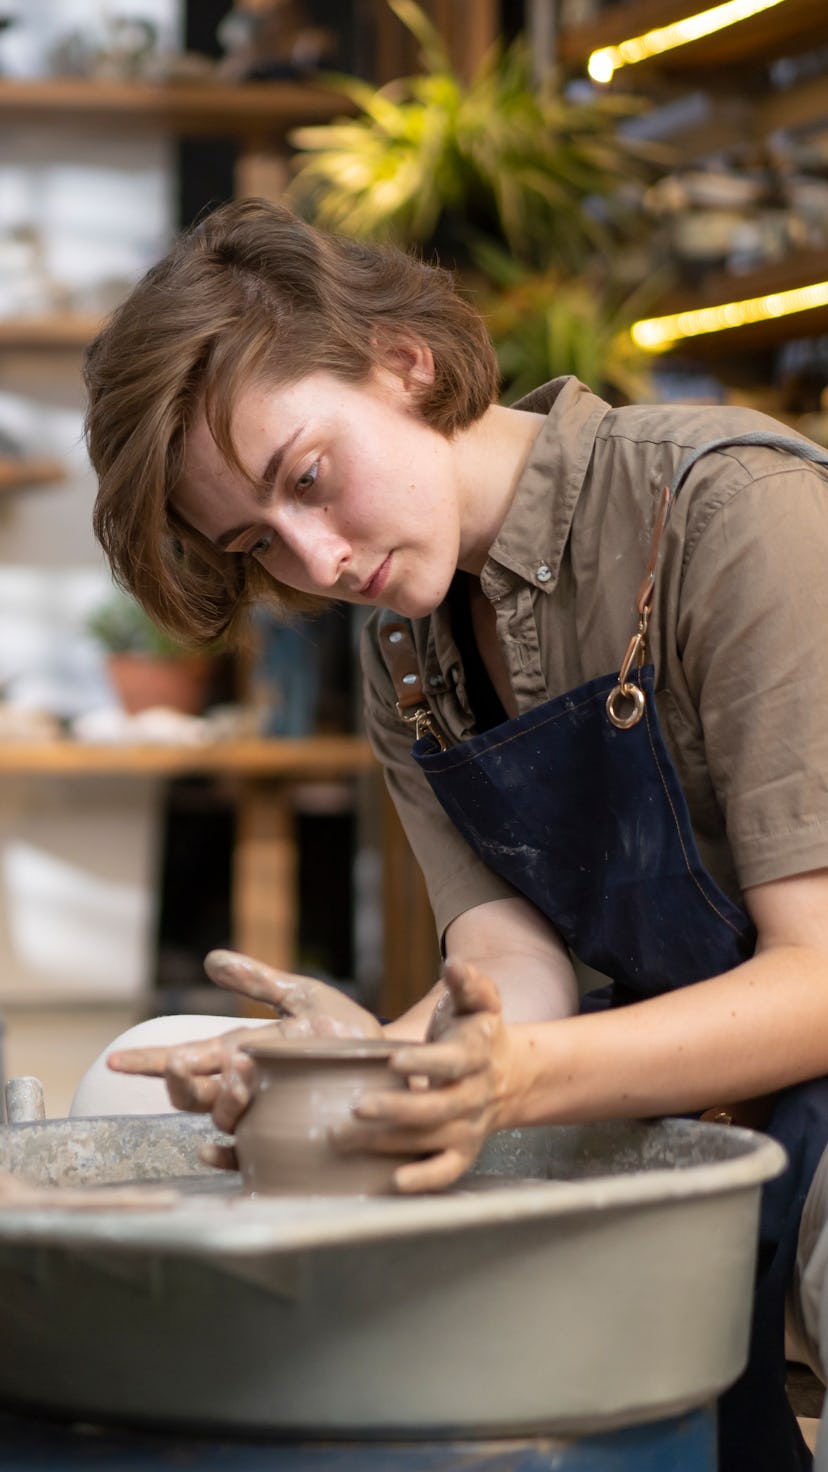 Two women in a pottery studio. Get creative during Leo season 2022 by starting new art projects or f...